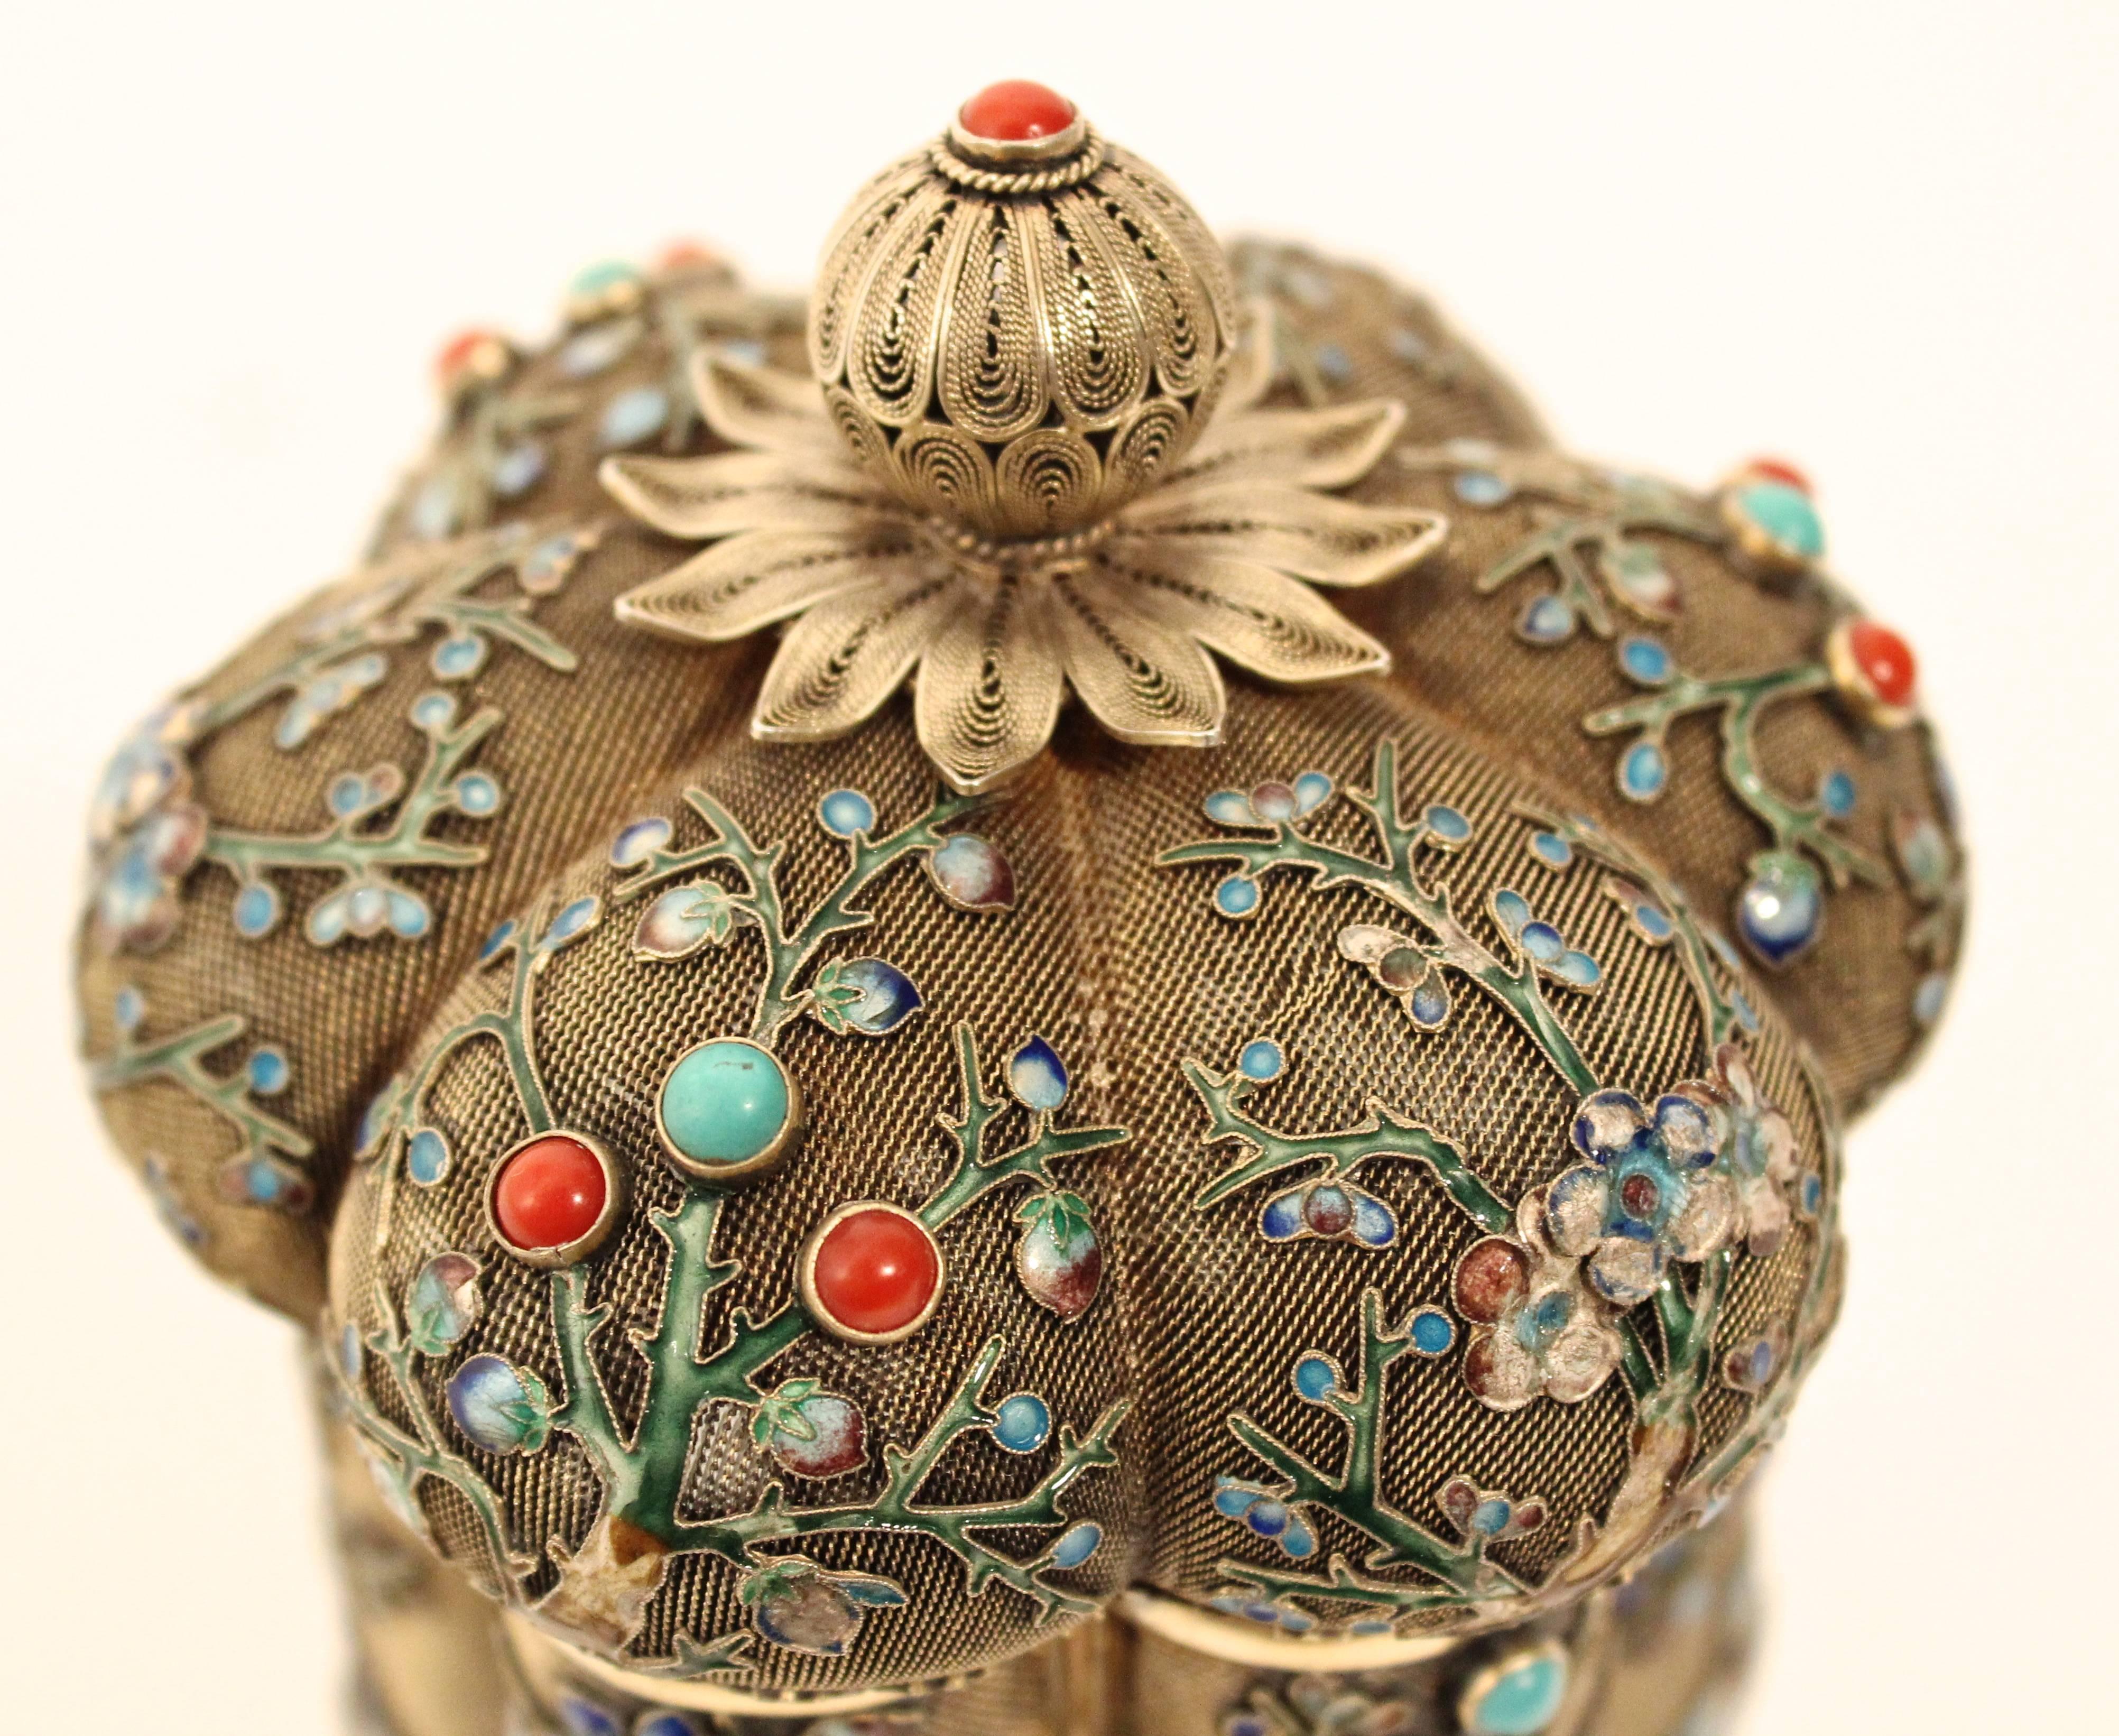 Highly decorated Chinese circular box in fine filigree work, with six lobes, circa 1910. In silver gilt, overlaid with brightly coloured enamel birds perched on branches and floral decoration interspersed with some hard stones. Topped by a delicate,